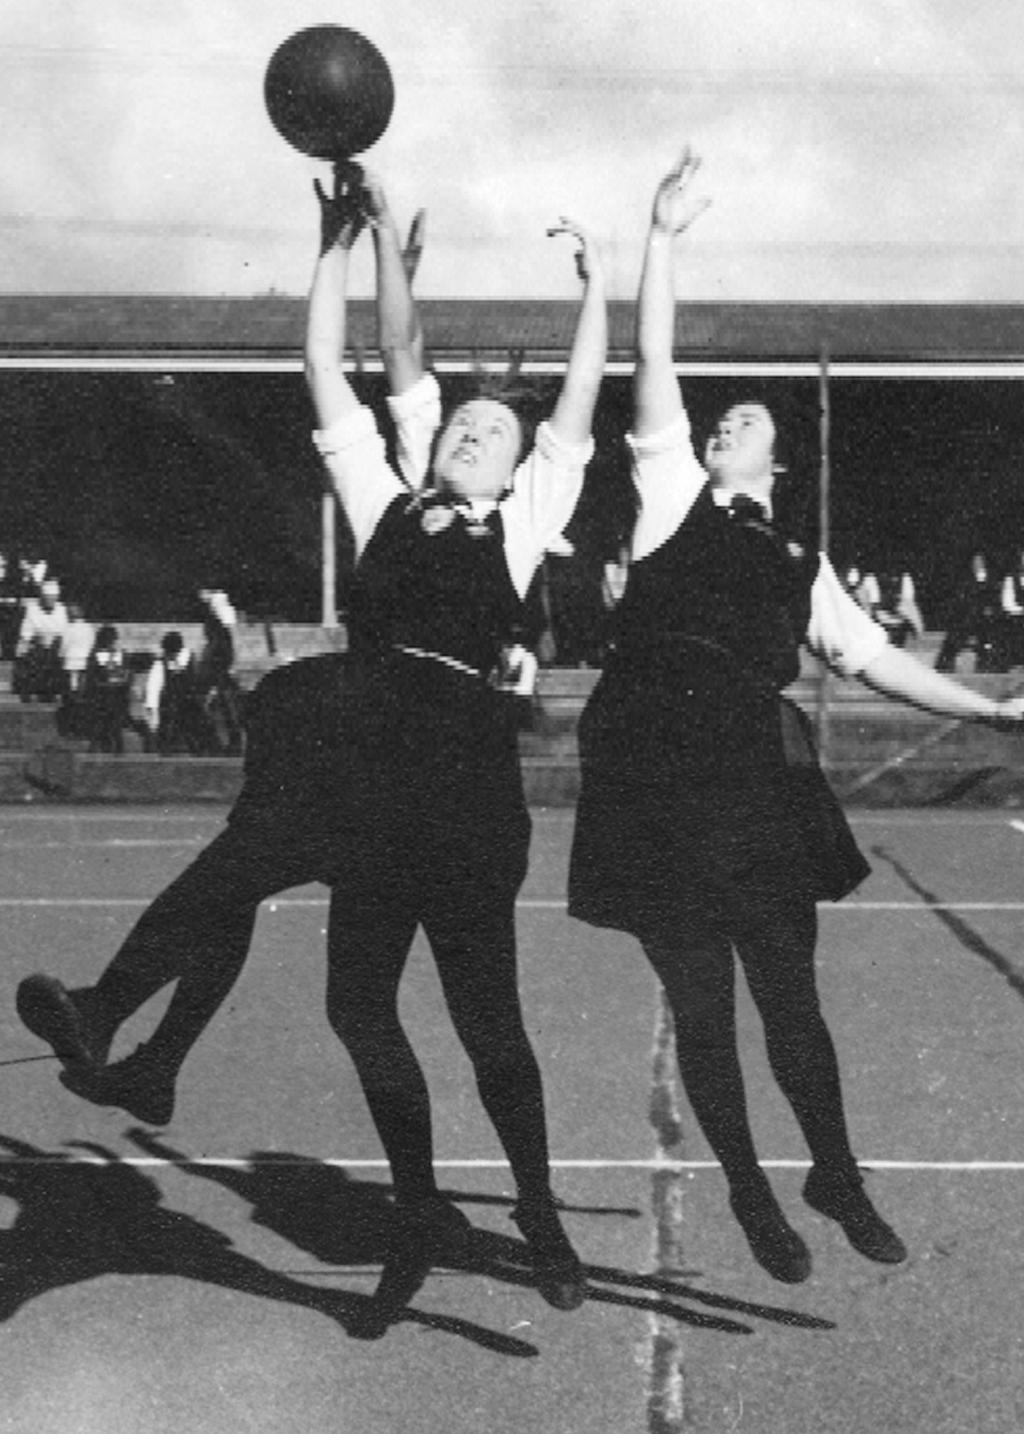 Our Story Auckland Netball Centre Inc. was originally founded in 1911. It is the oldest and largest netball centre in New Zealand and is a significant contributor to netball in New Zealand.